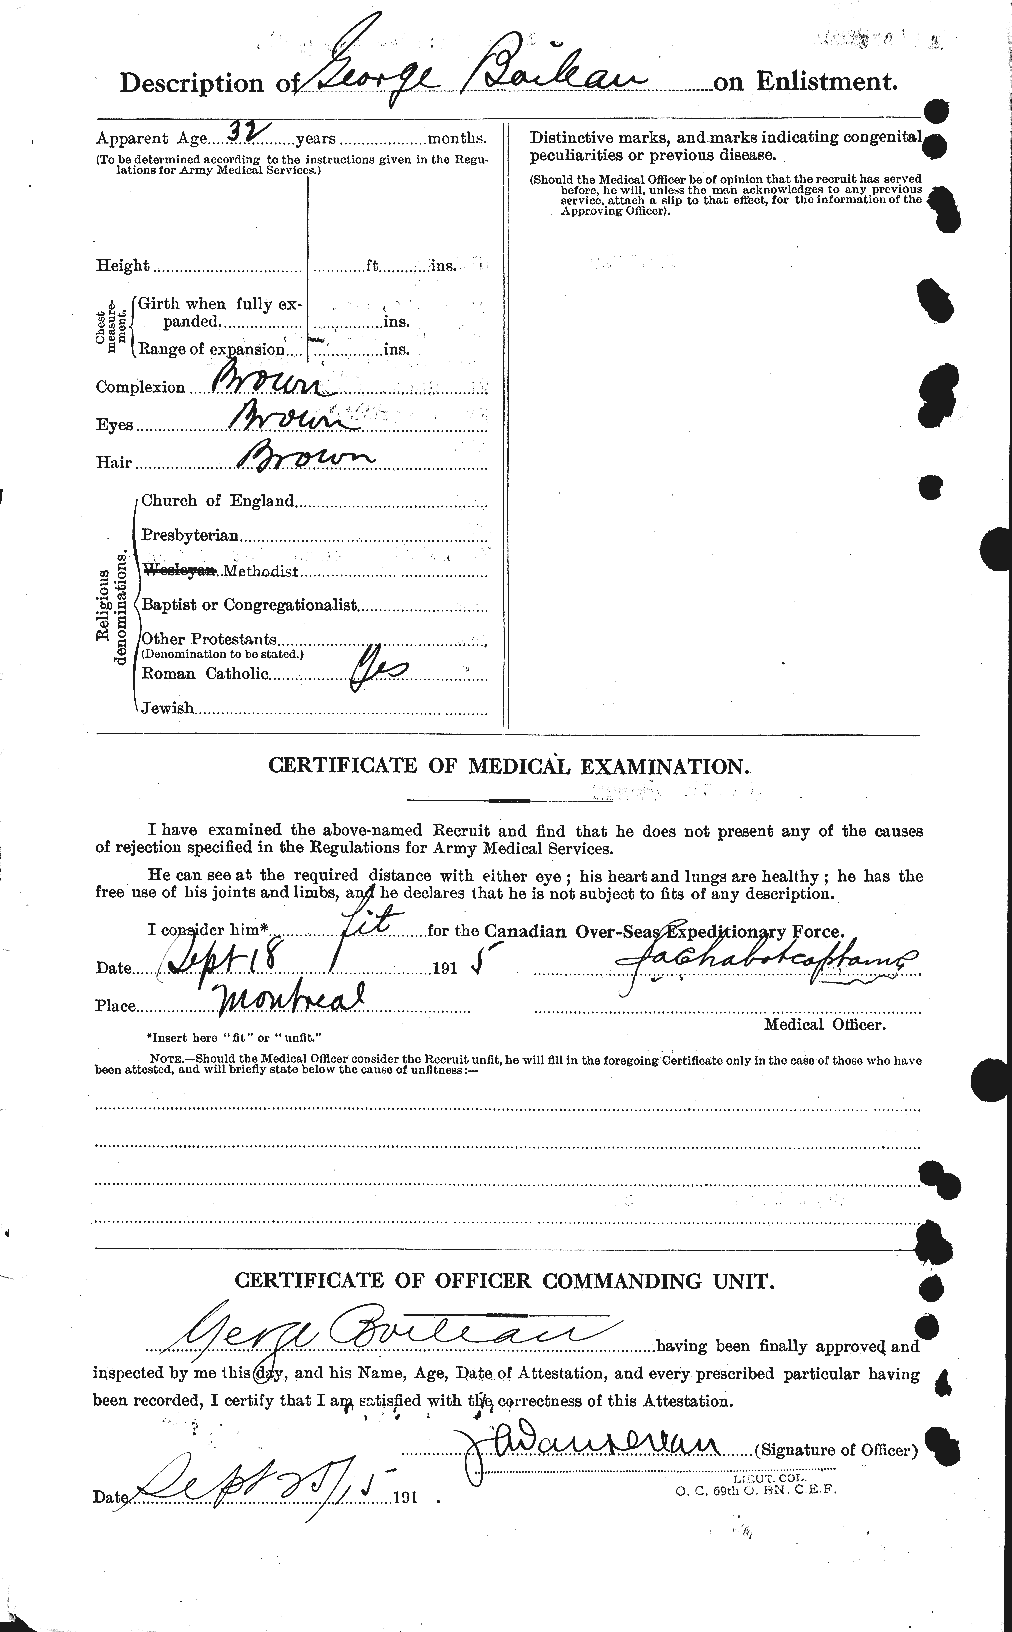 Personnel Records of the First World War - CEF 249338b